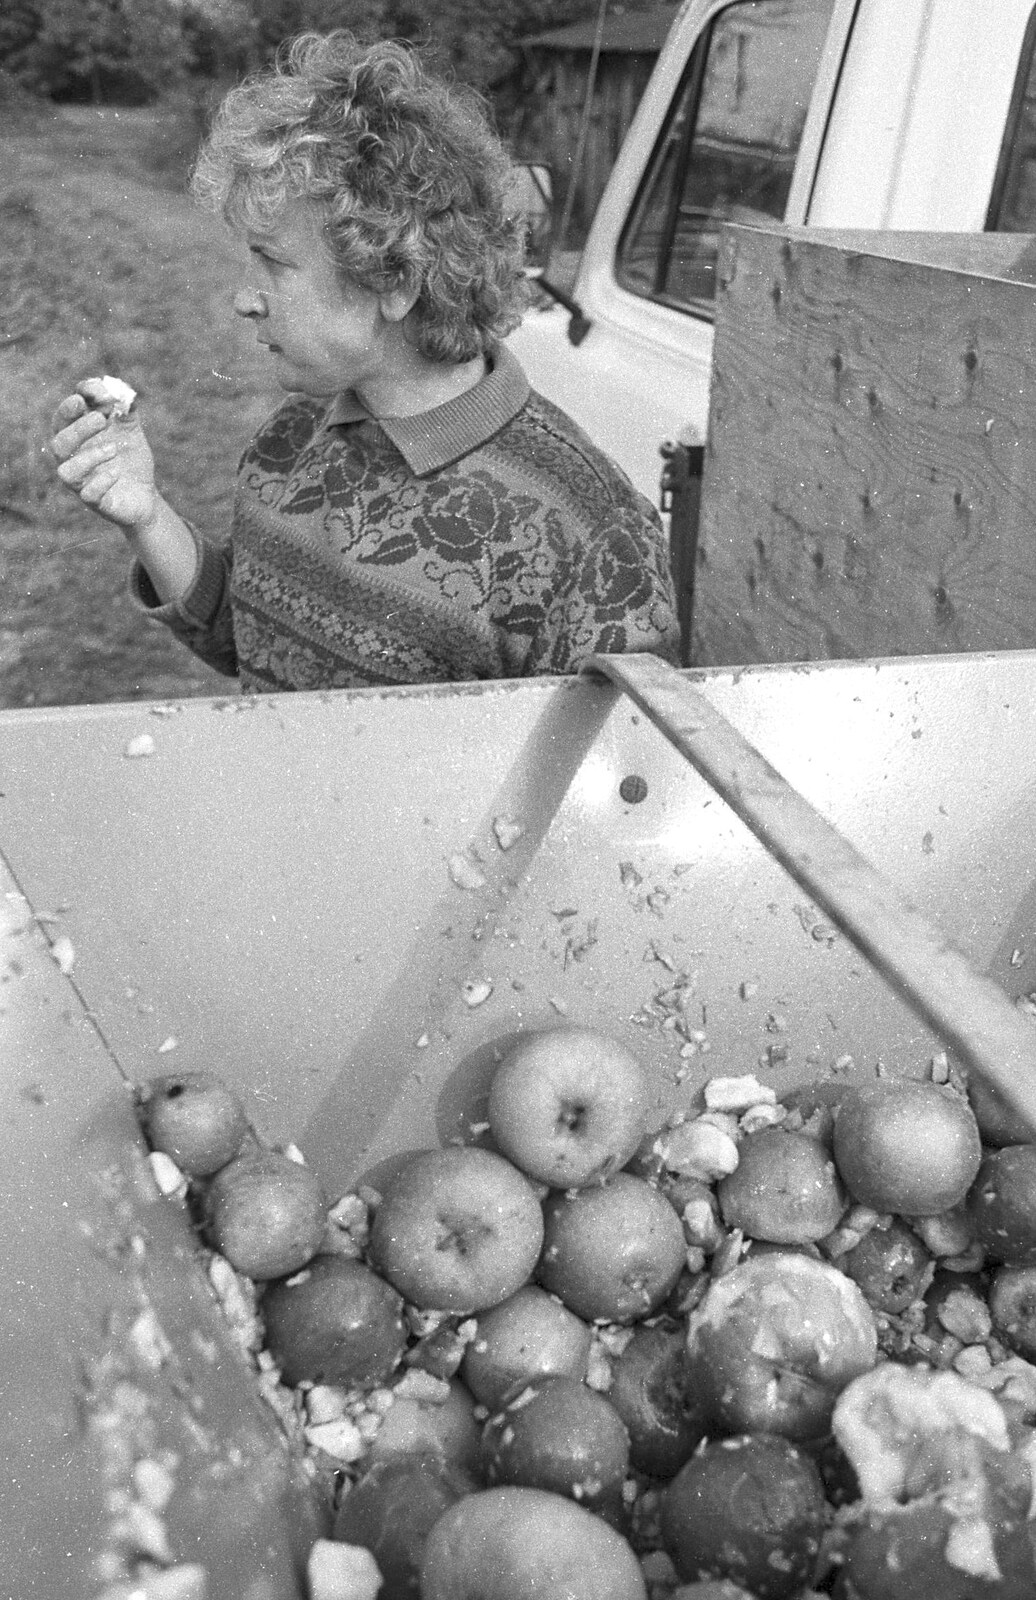 Linda tests the source material from Cider Making in Black and White, Stuston, Suffolk - 11th October 1992